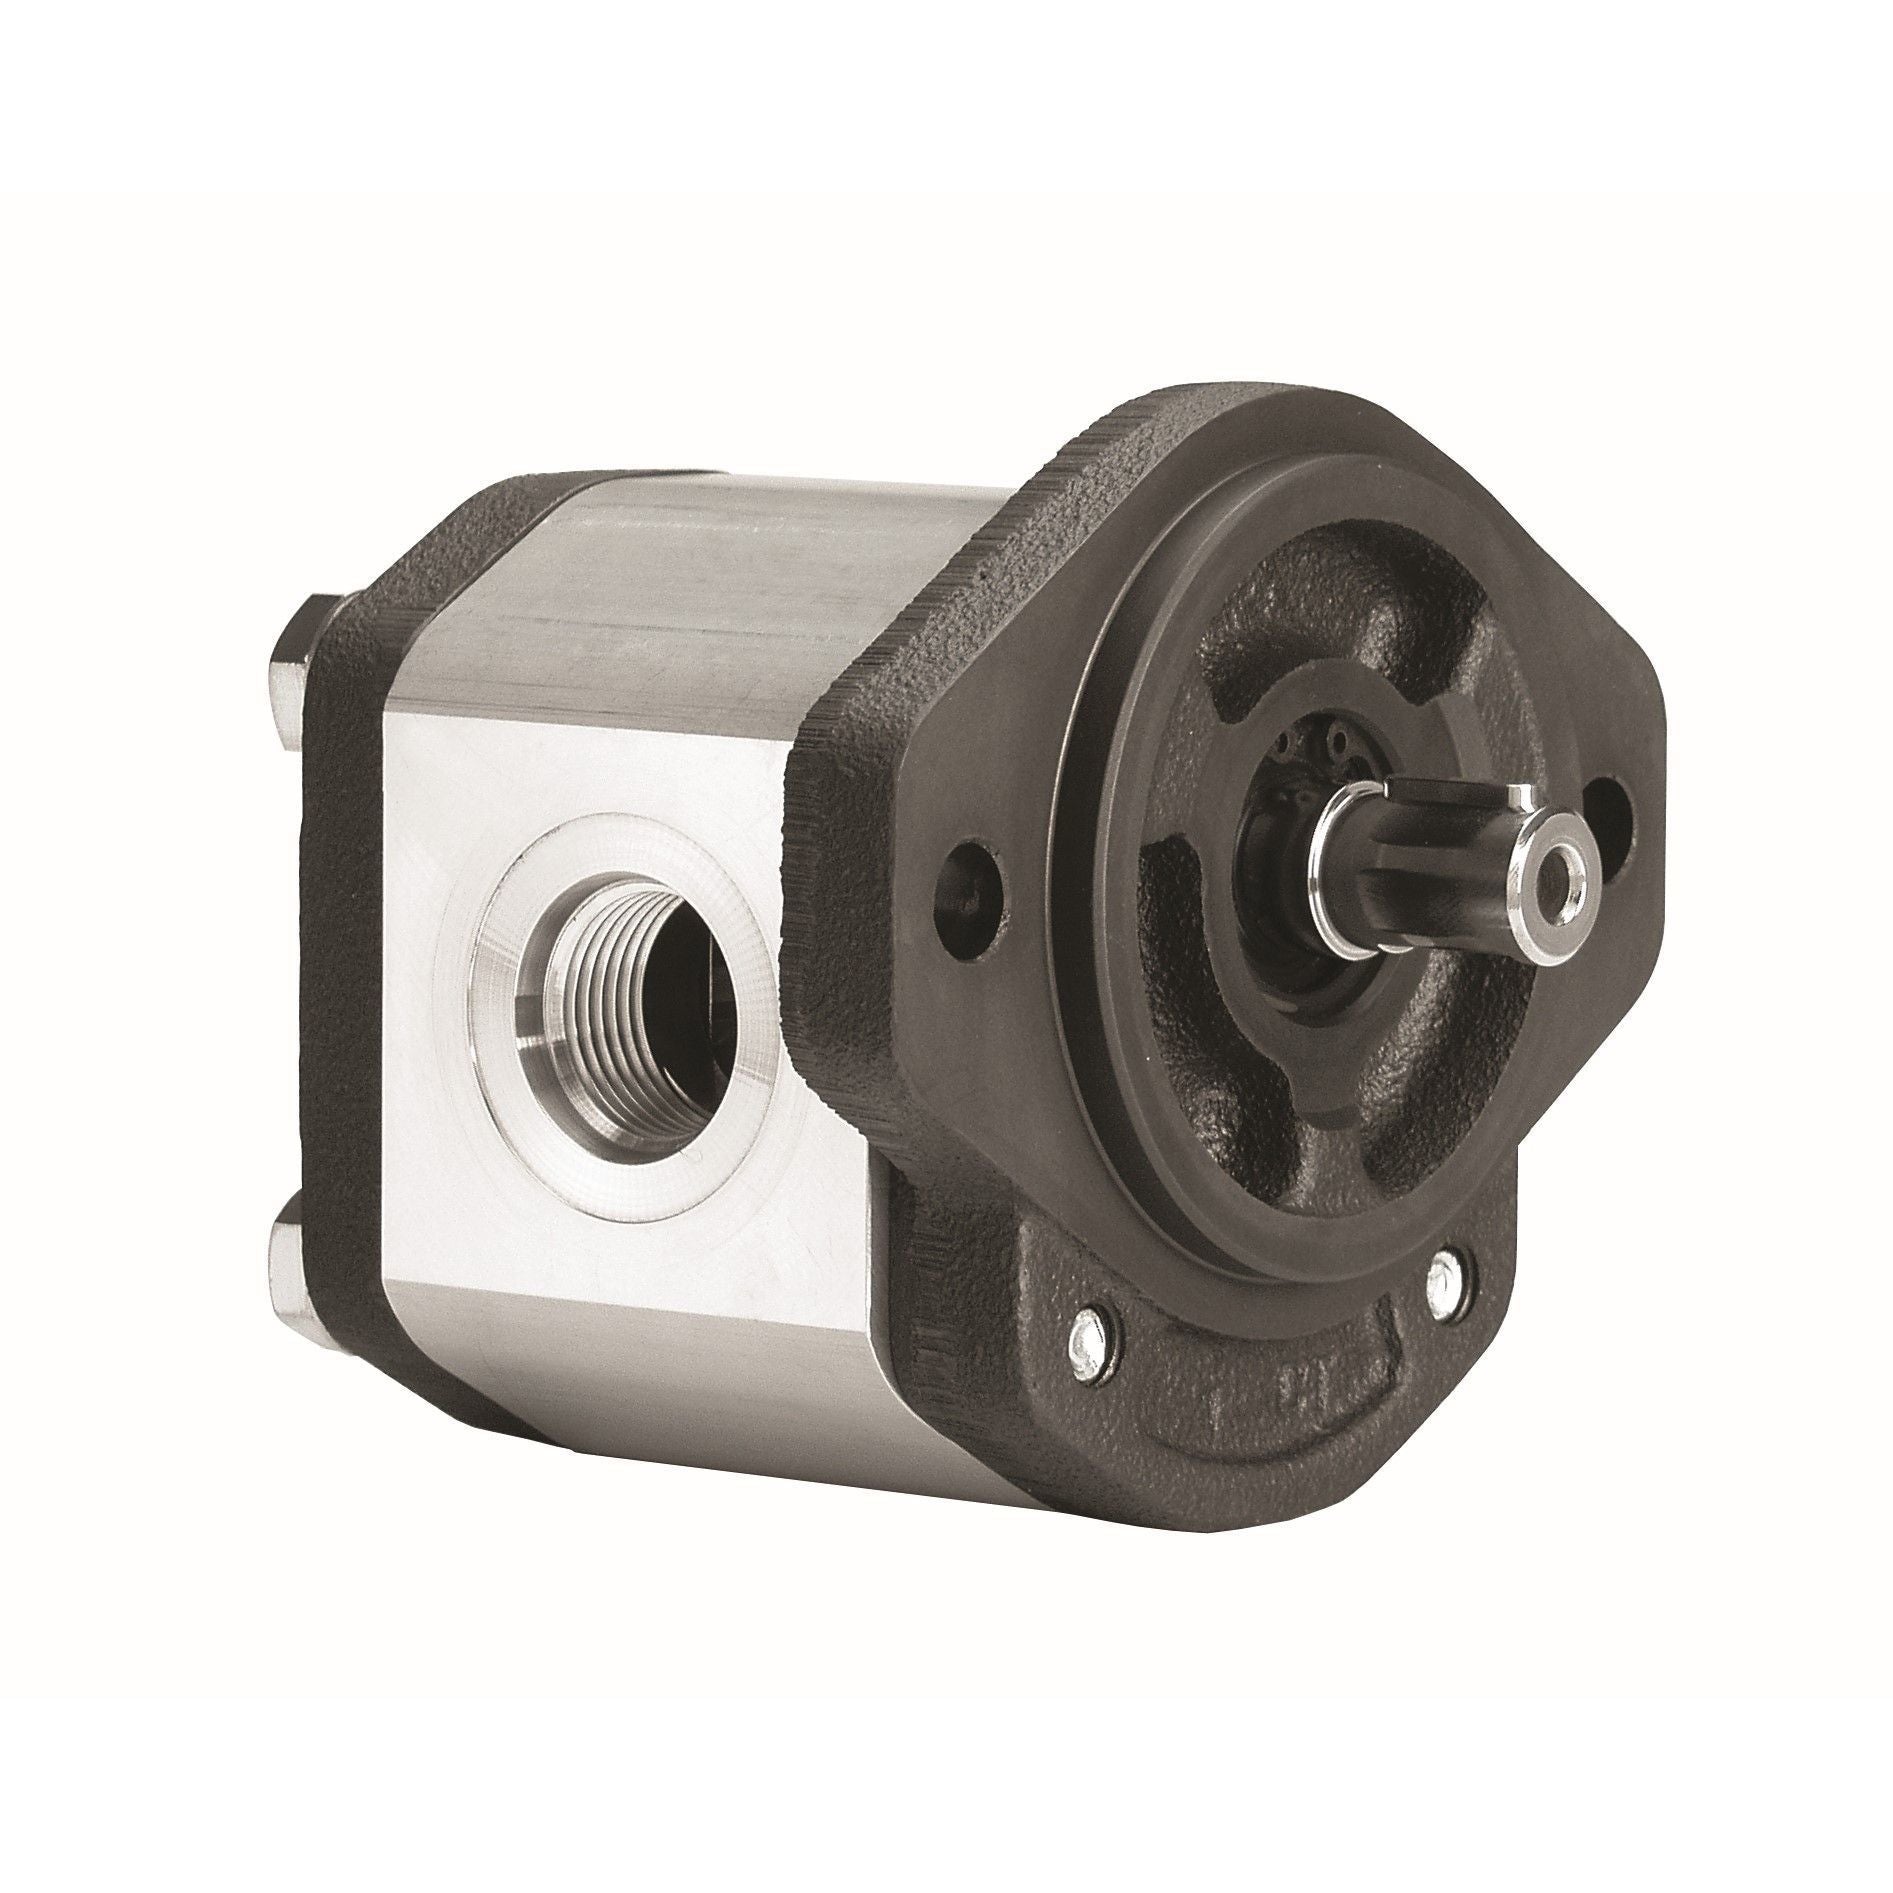 GHP2A-D-16 : Marzocchi Gear Pump, CW, 11.5cc (0.7015in3), 5.47 GPM, 4060psi, 4000 RPM, #12 SAE (3/4") In, #10 SAE (5/8") Out, Keyed Shaft 5/8" Bore x 5/32" Key, SAE A 2-Bolt Mount